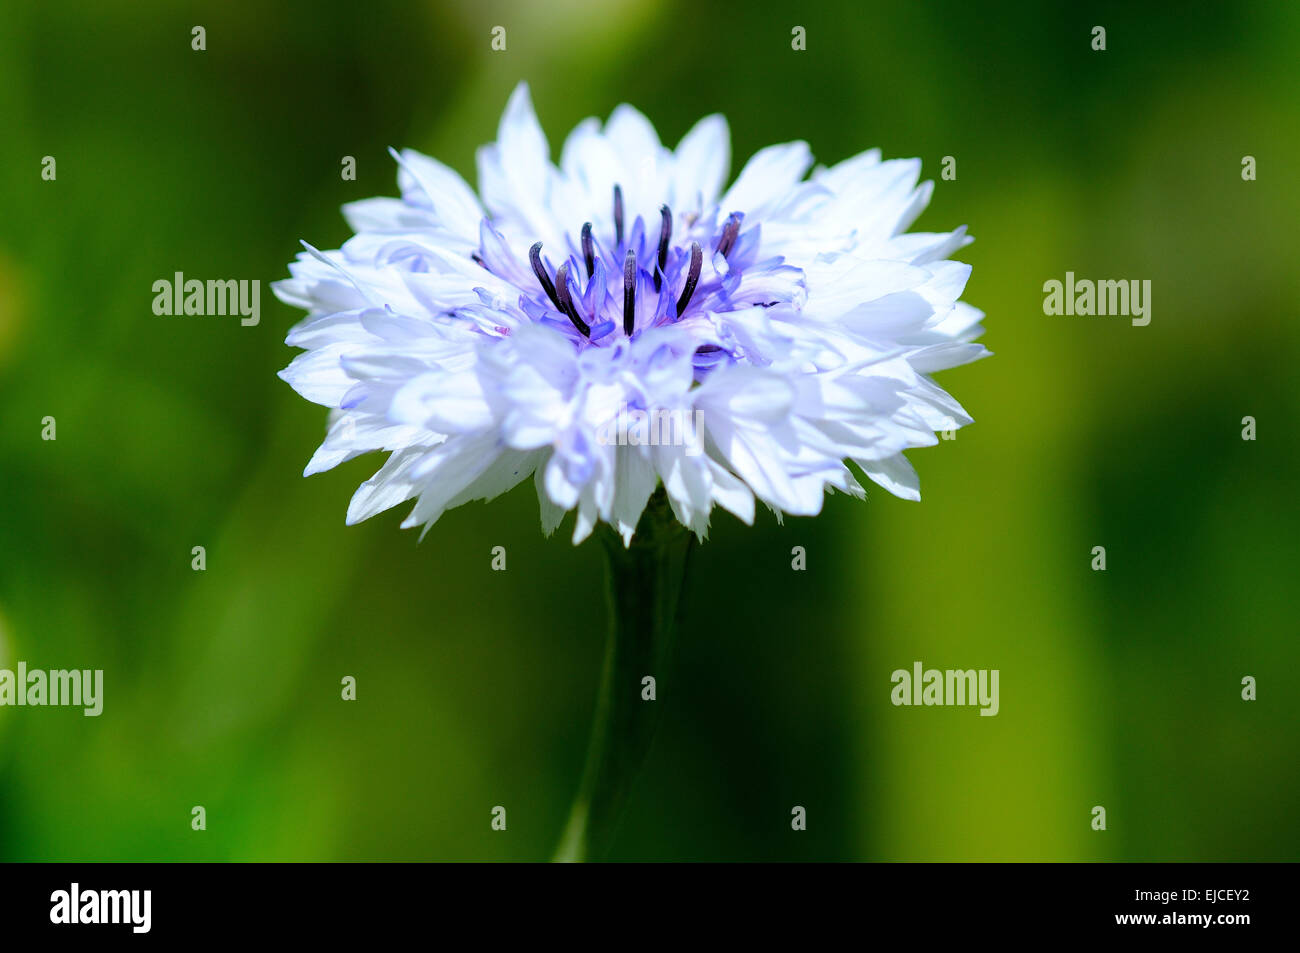 Cornflowers bloom at the wither Stock Photo